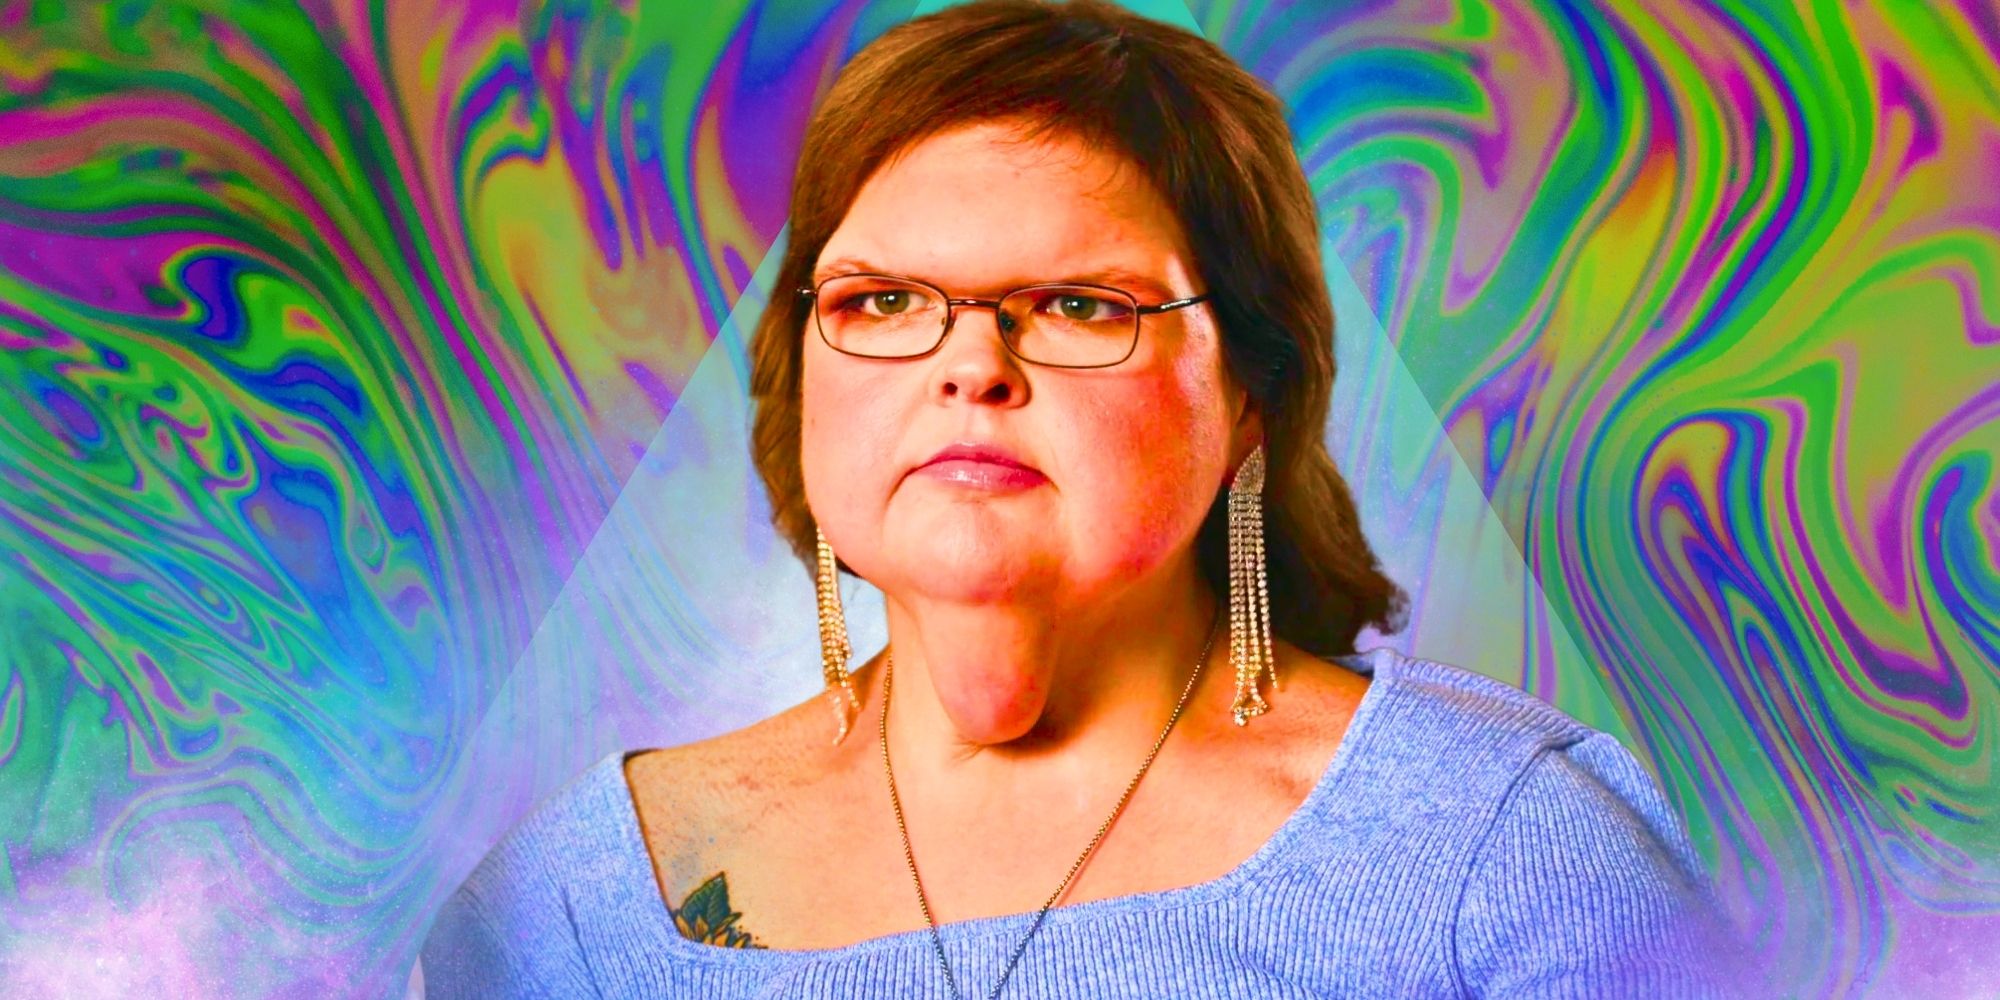 tammy slaton 1000 lb sisters montage of tammy in blue with psychedlic background